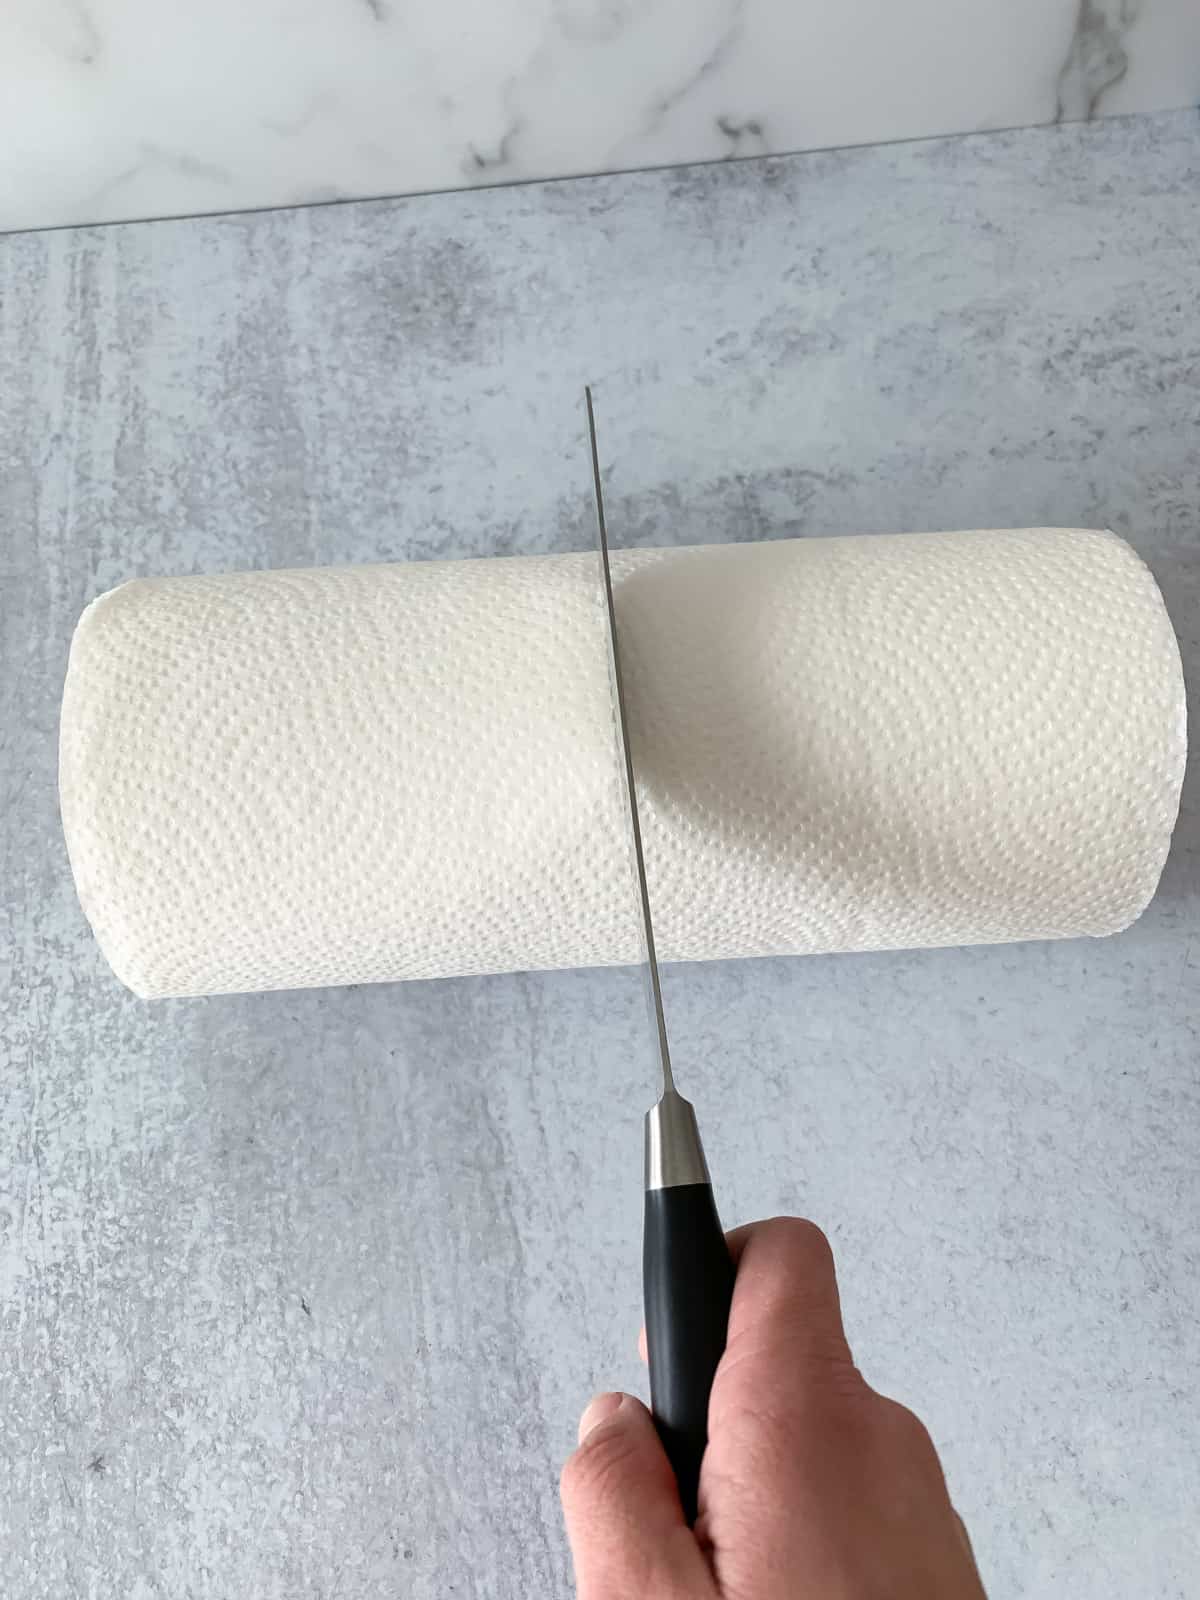 cut paper towels in half for homemade wipes